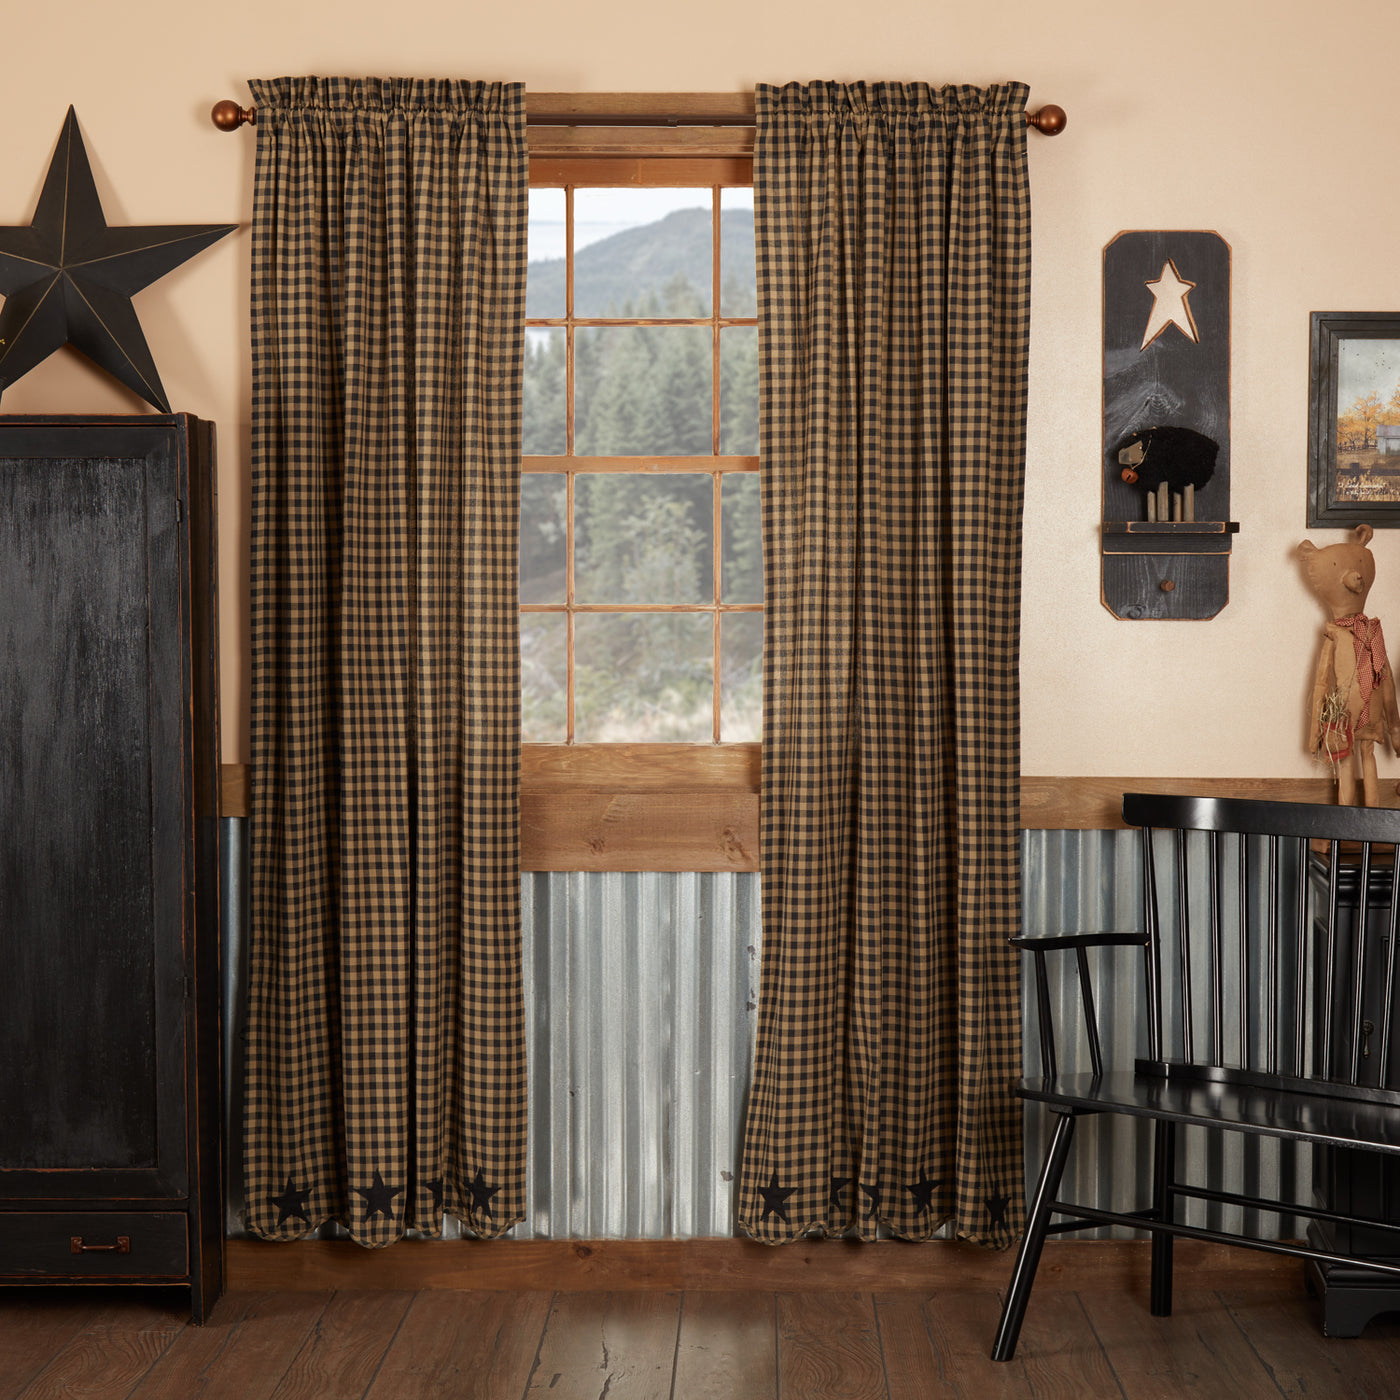 Set of 2 Black Star Scalloped Panel Curtains 84'' x 40''